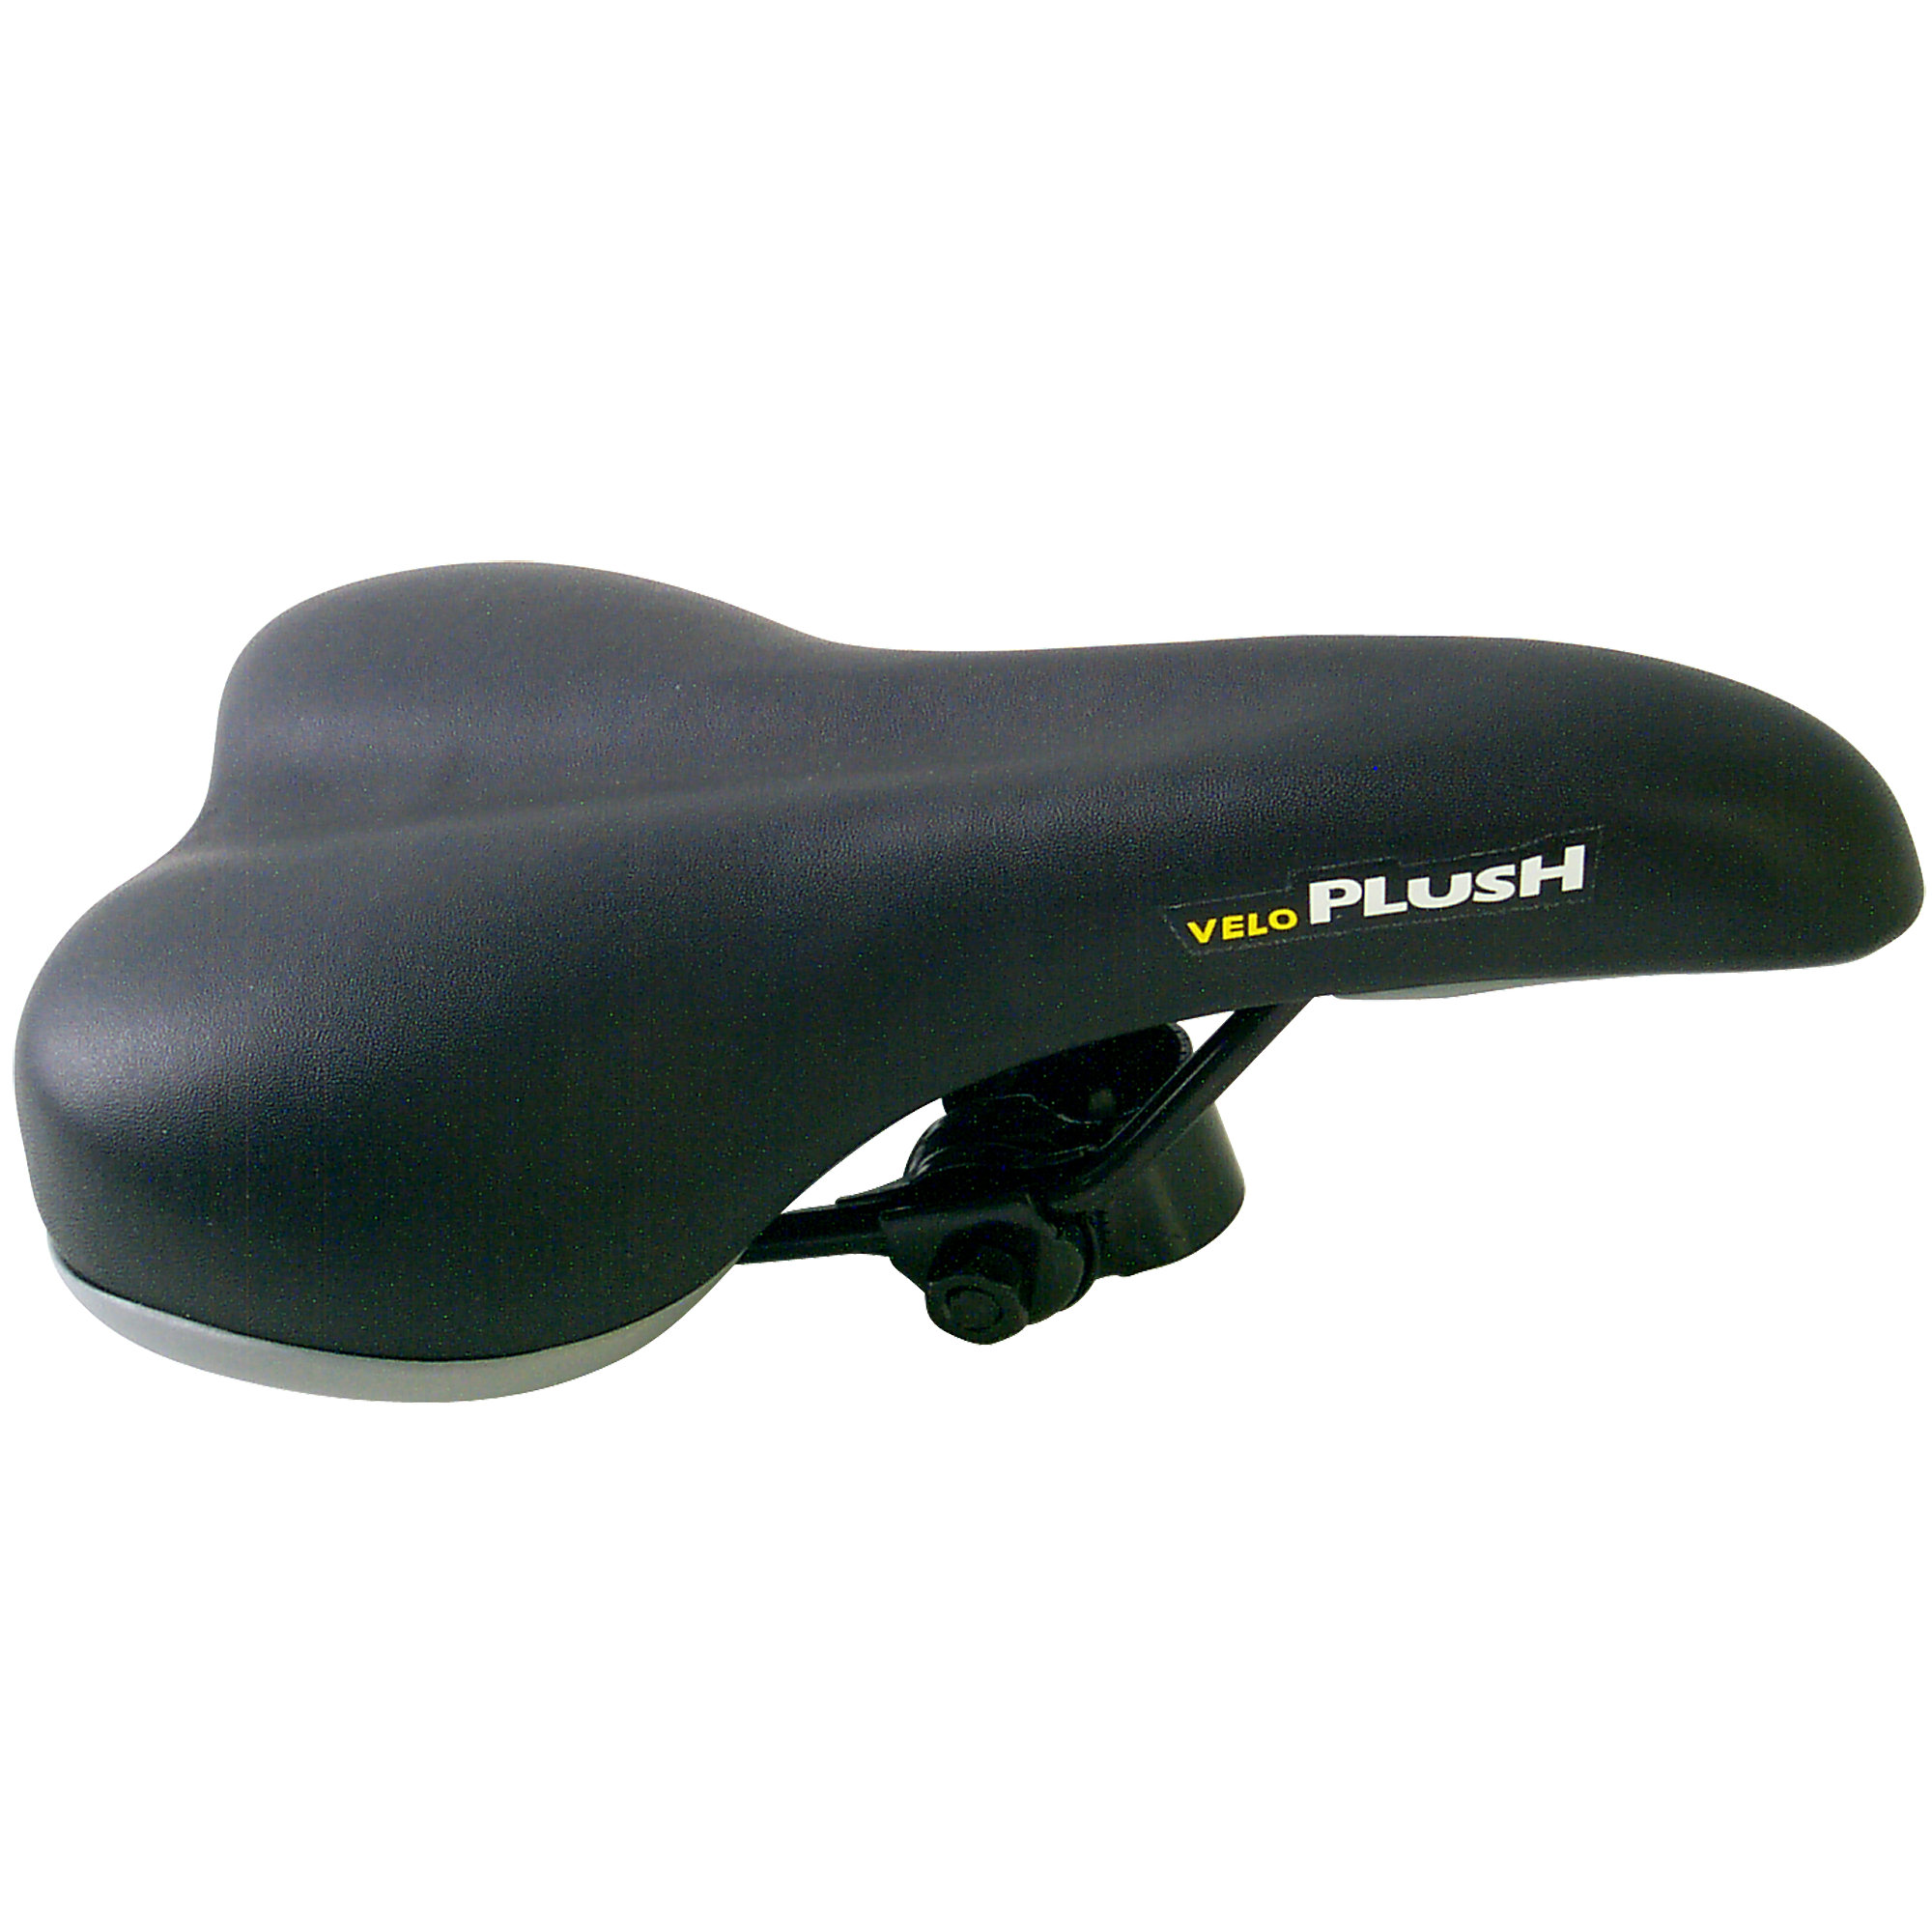 Bike Seat for Keiser M3 Indoor Cycles